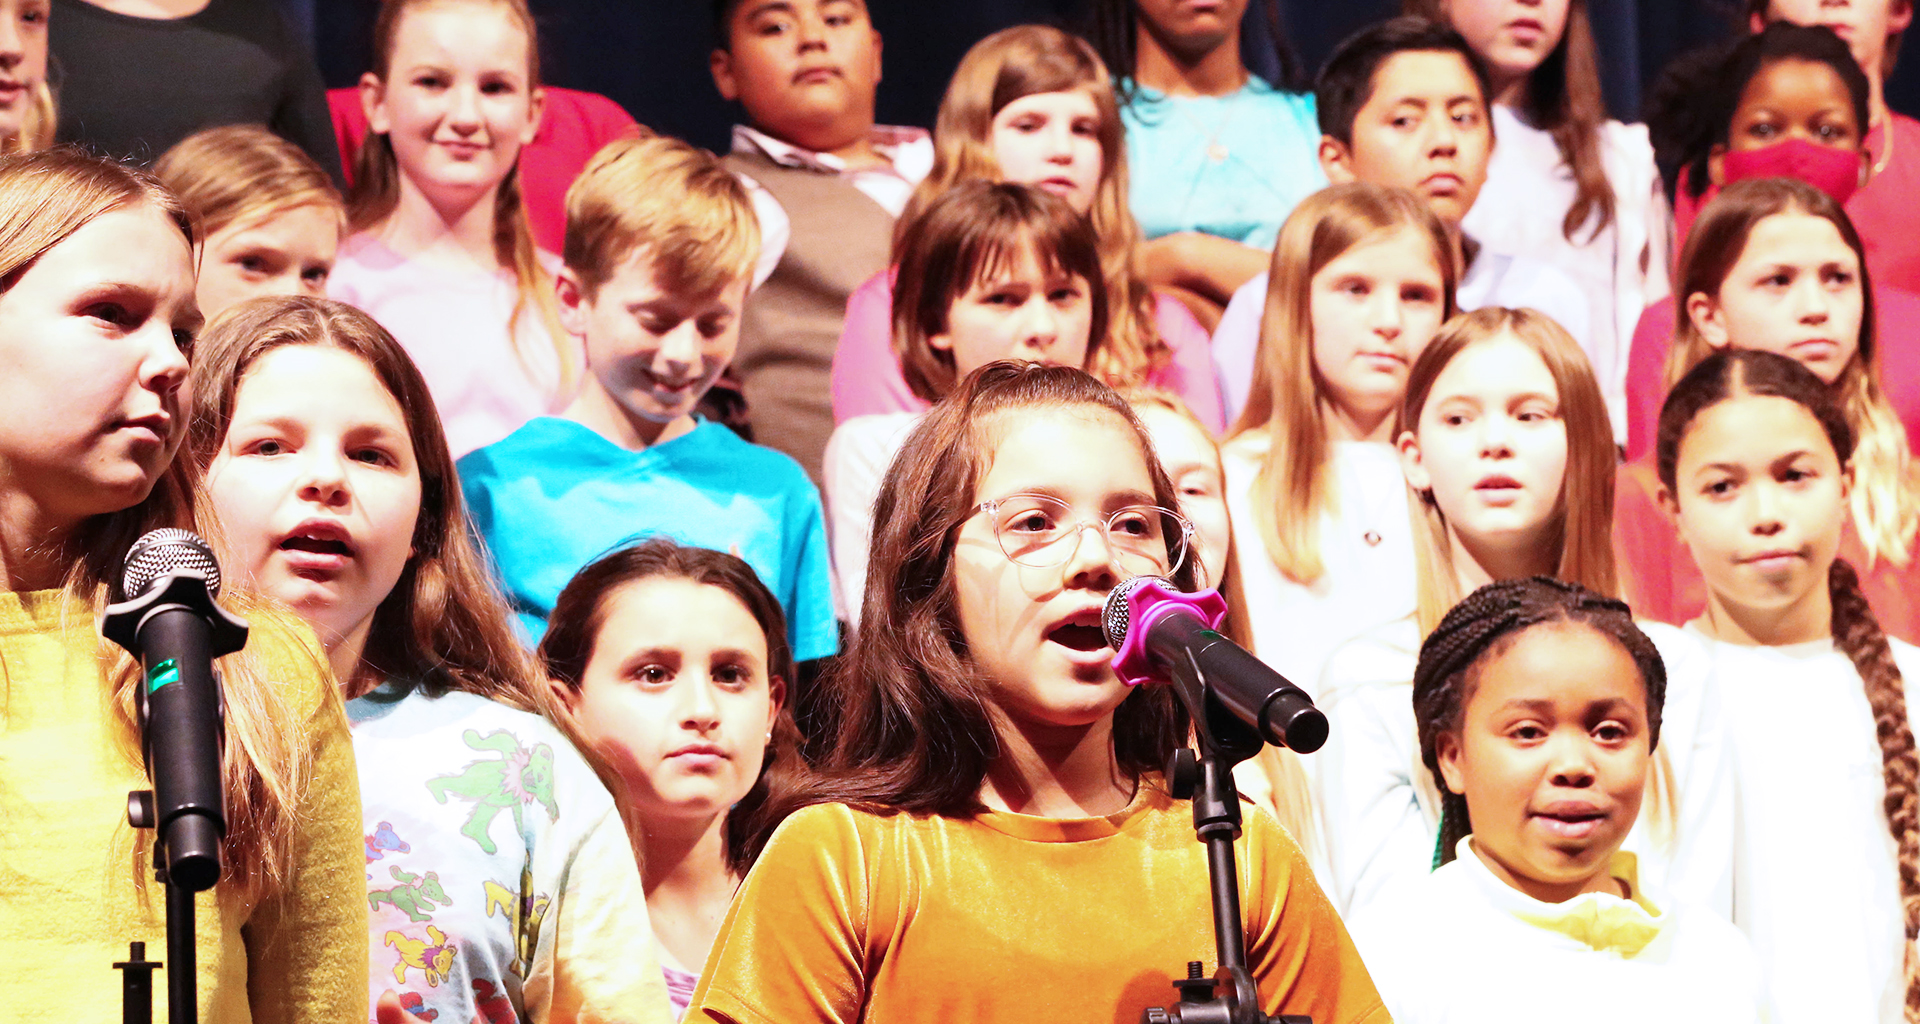 Students singing together during a performance